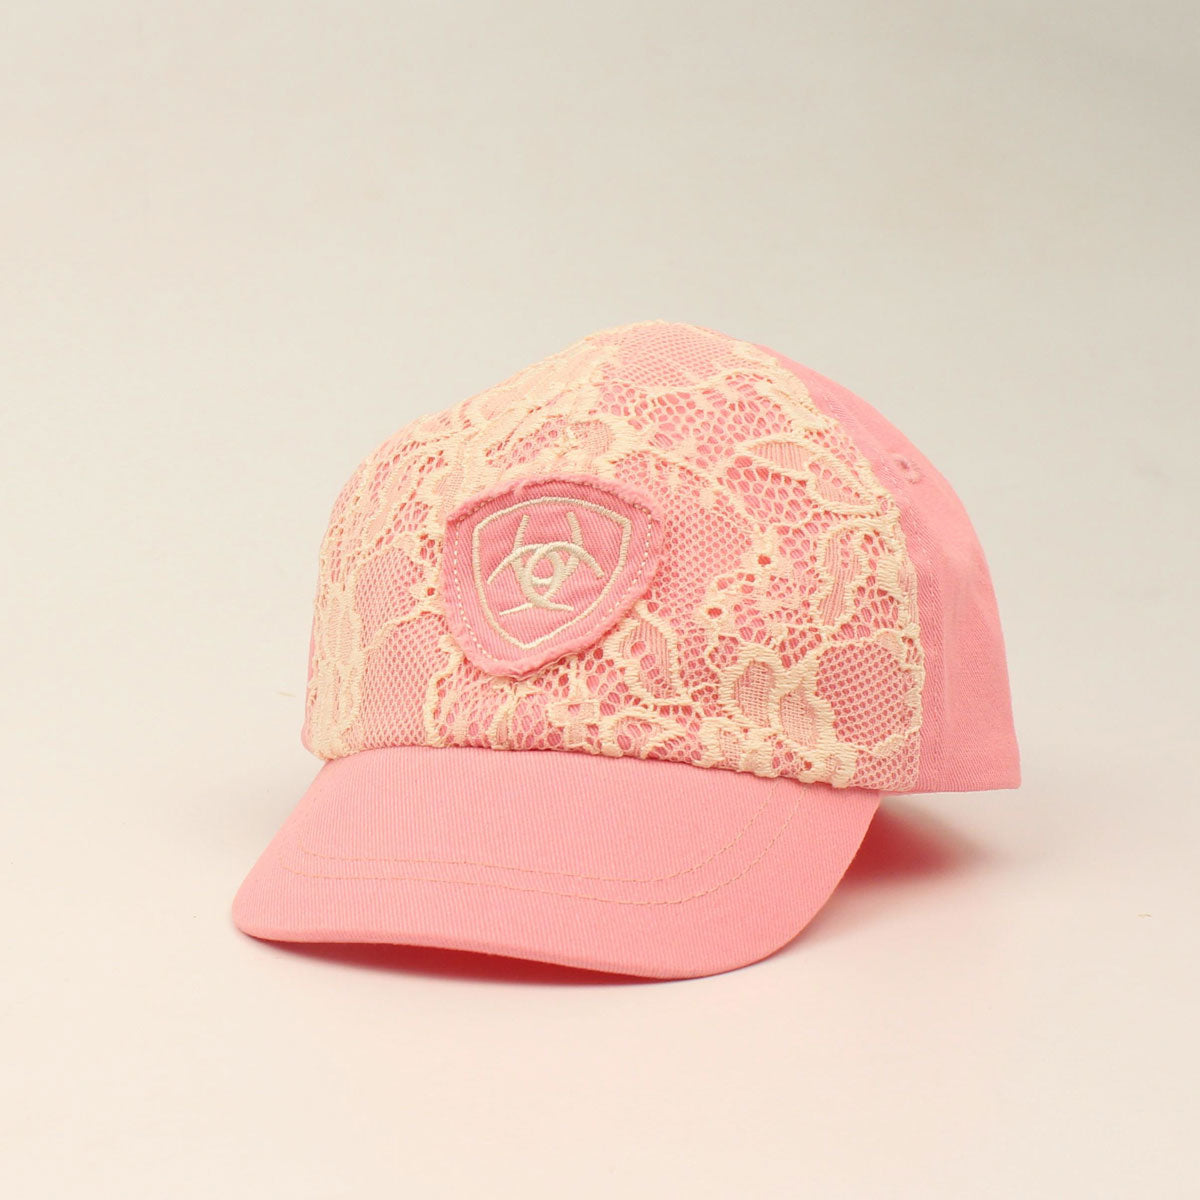 Infant Ariat Girls Pink & Lace Ball Cap